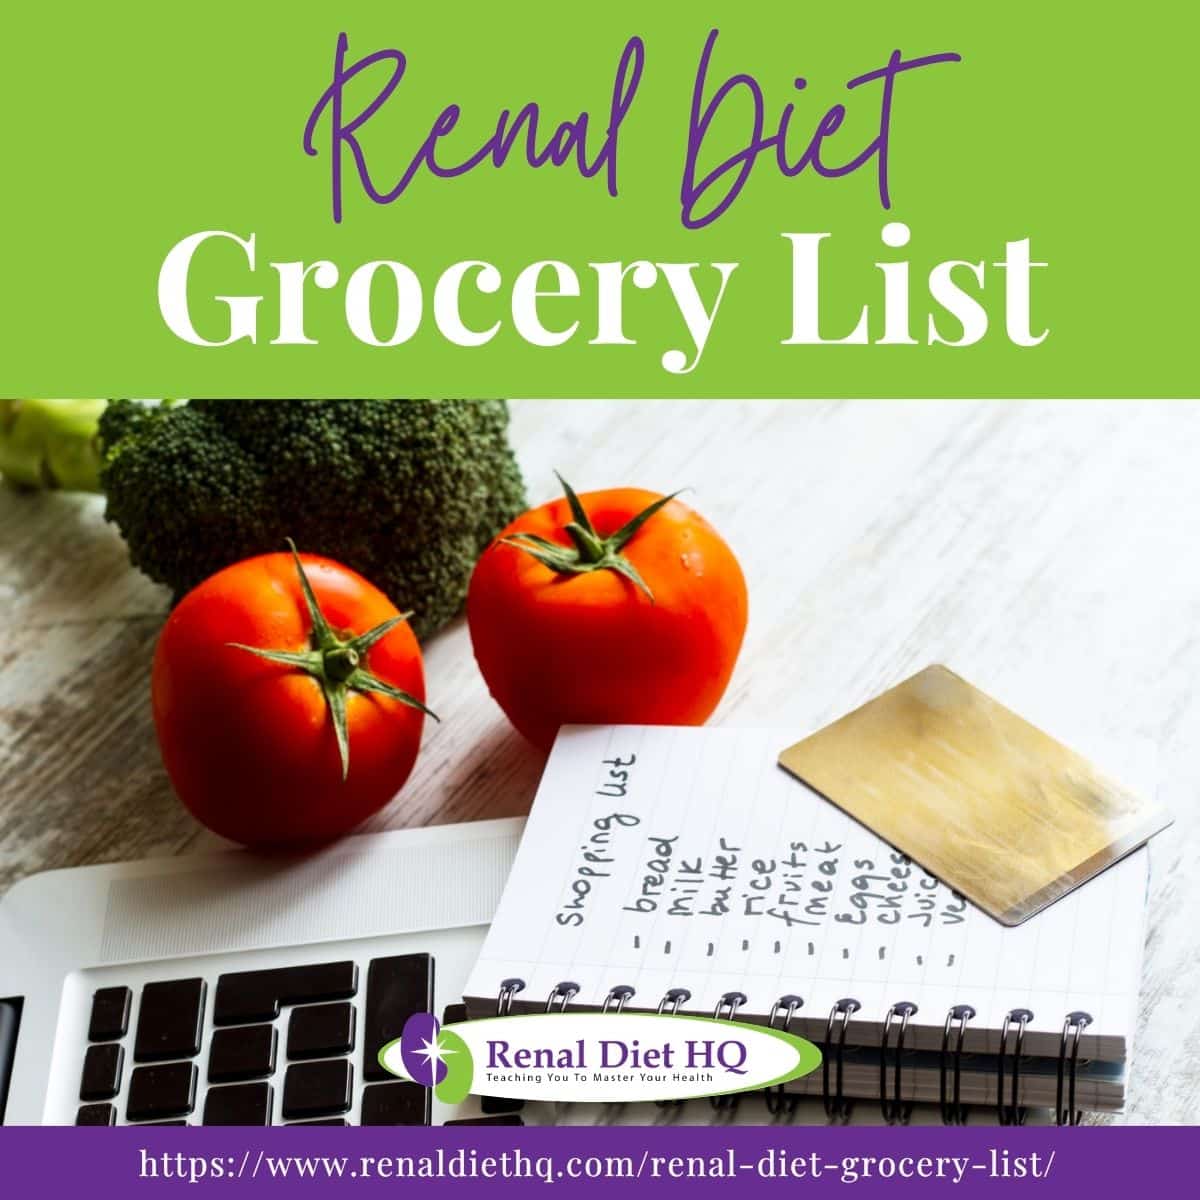 Grocery list with two pieces of tomatoes and broccoli